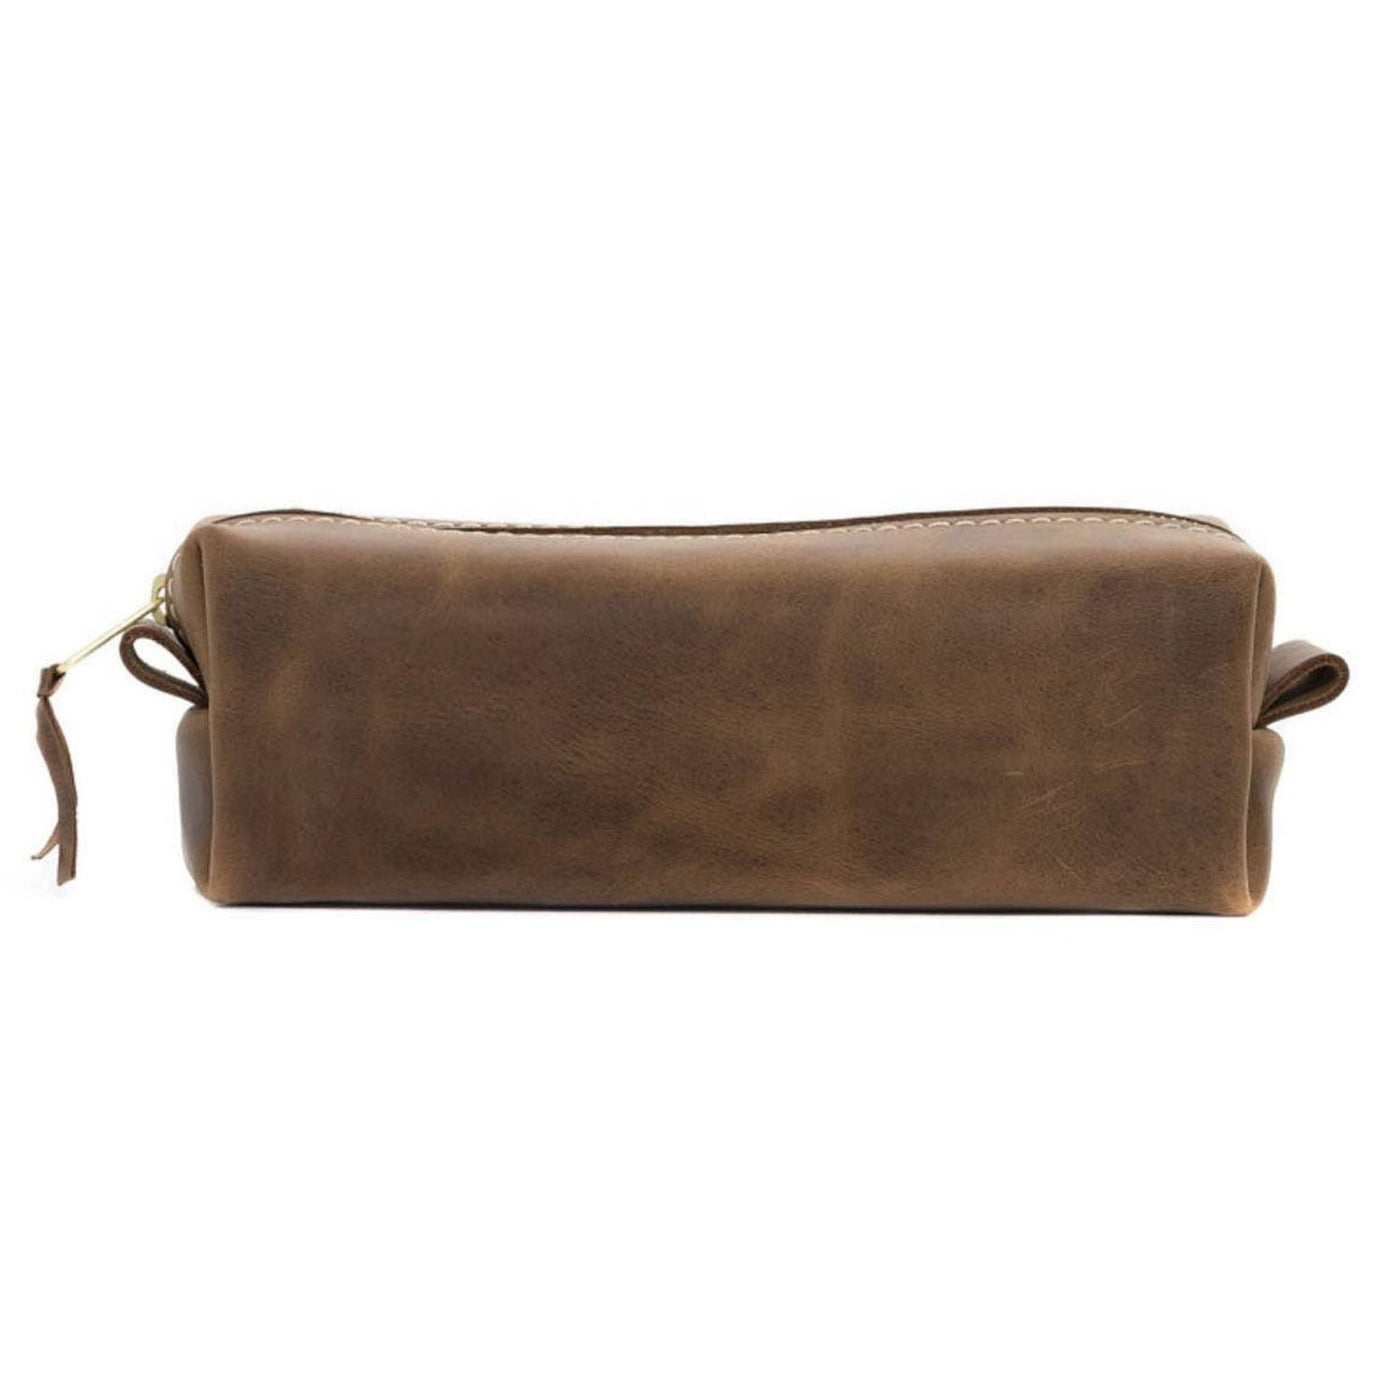 Desert Sand Leather Luz Toiletry Bag by Naked Armor sold by Naked Armor Razors